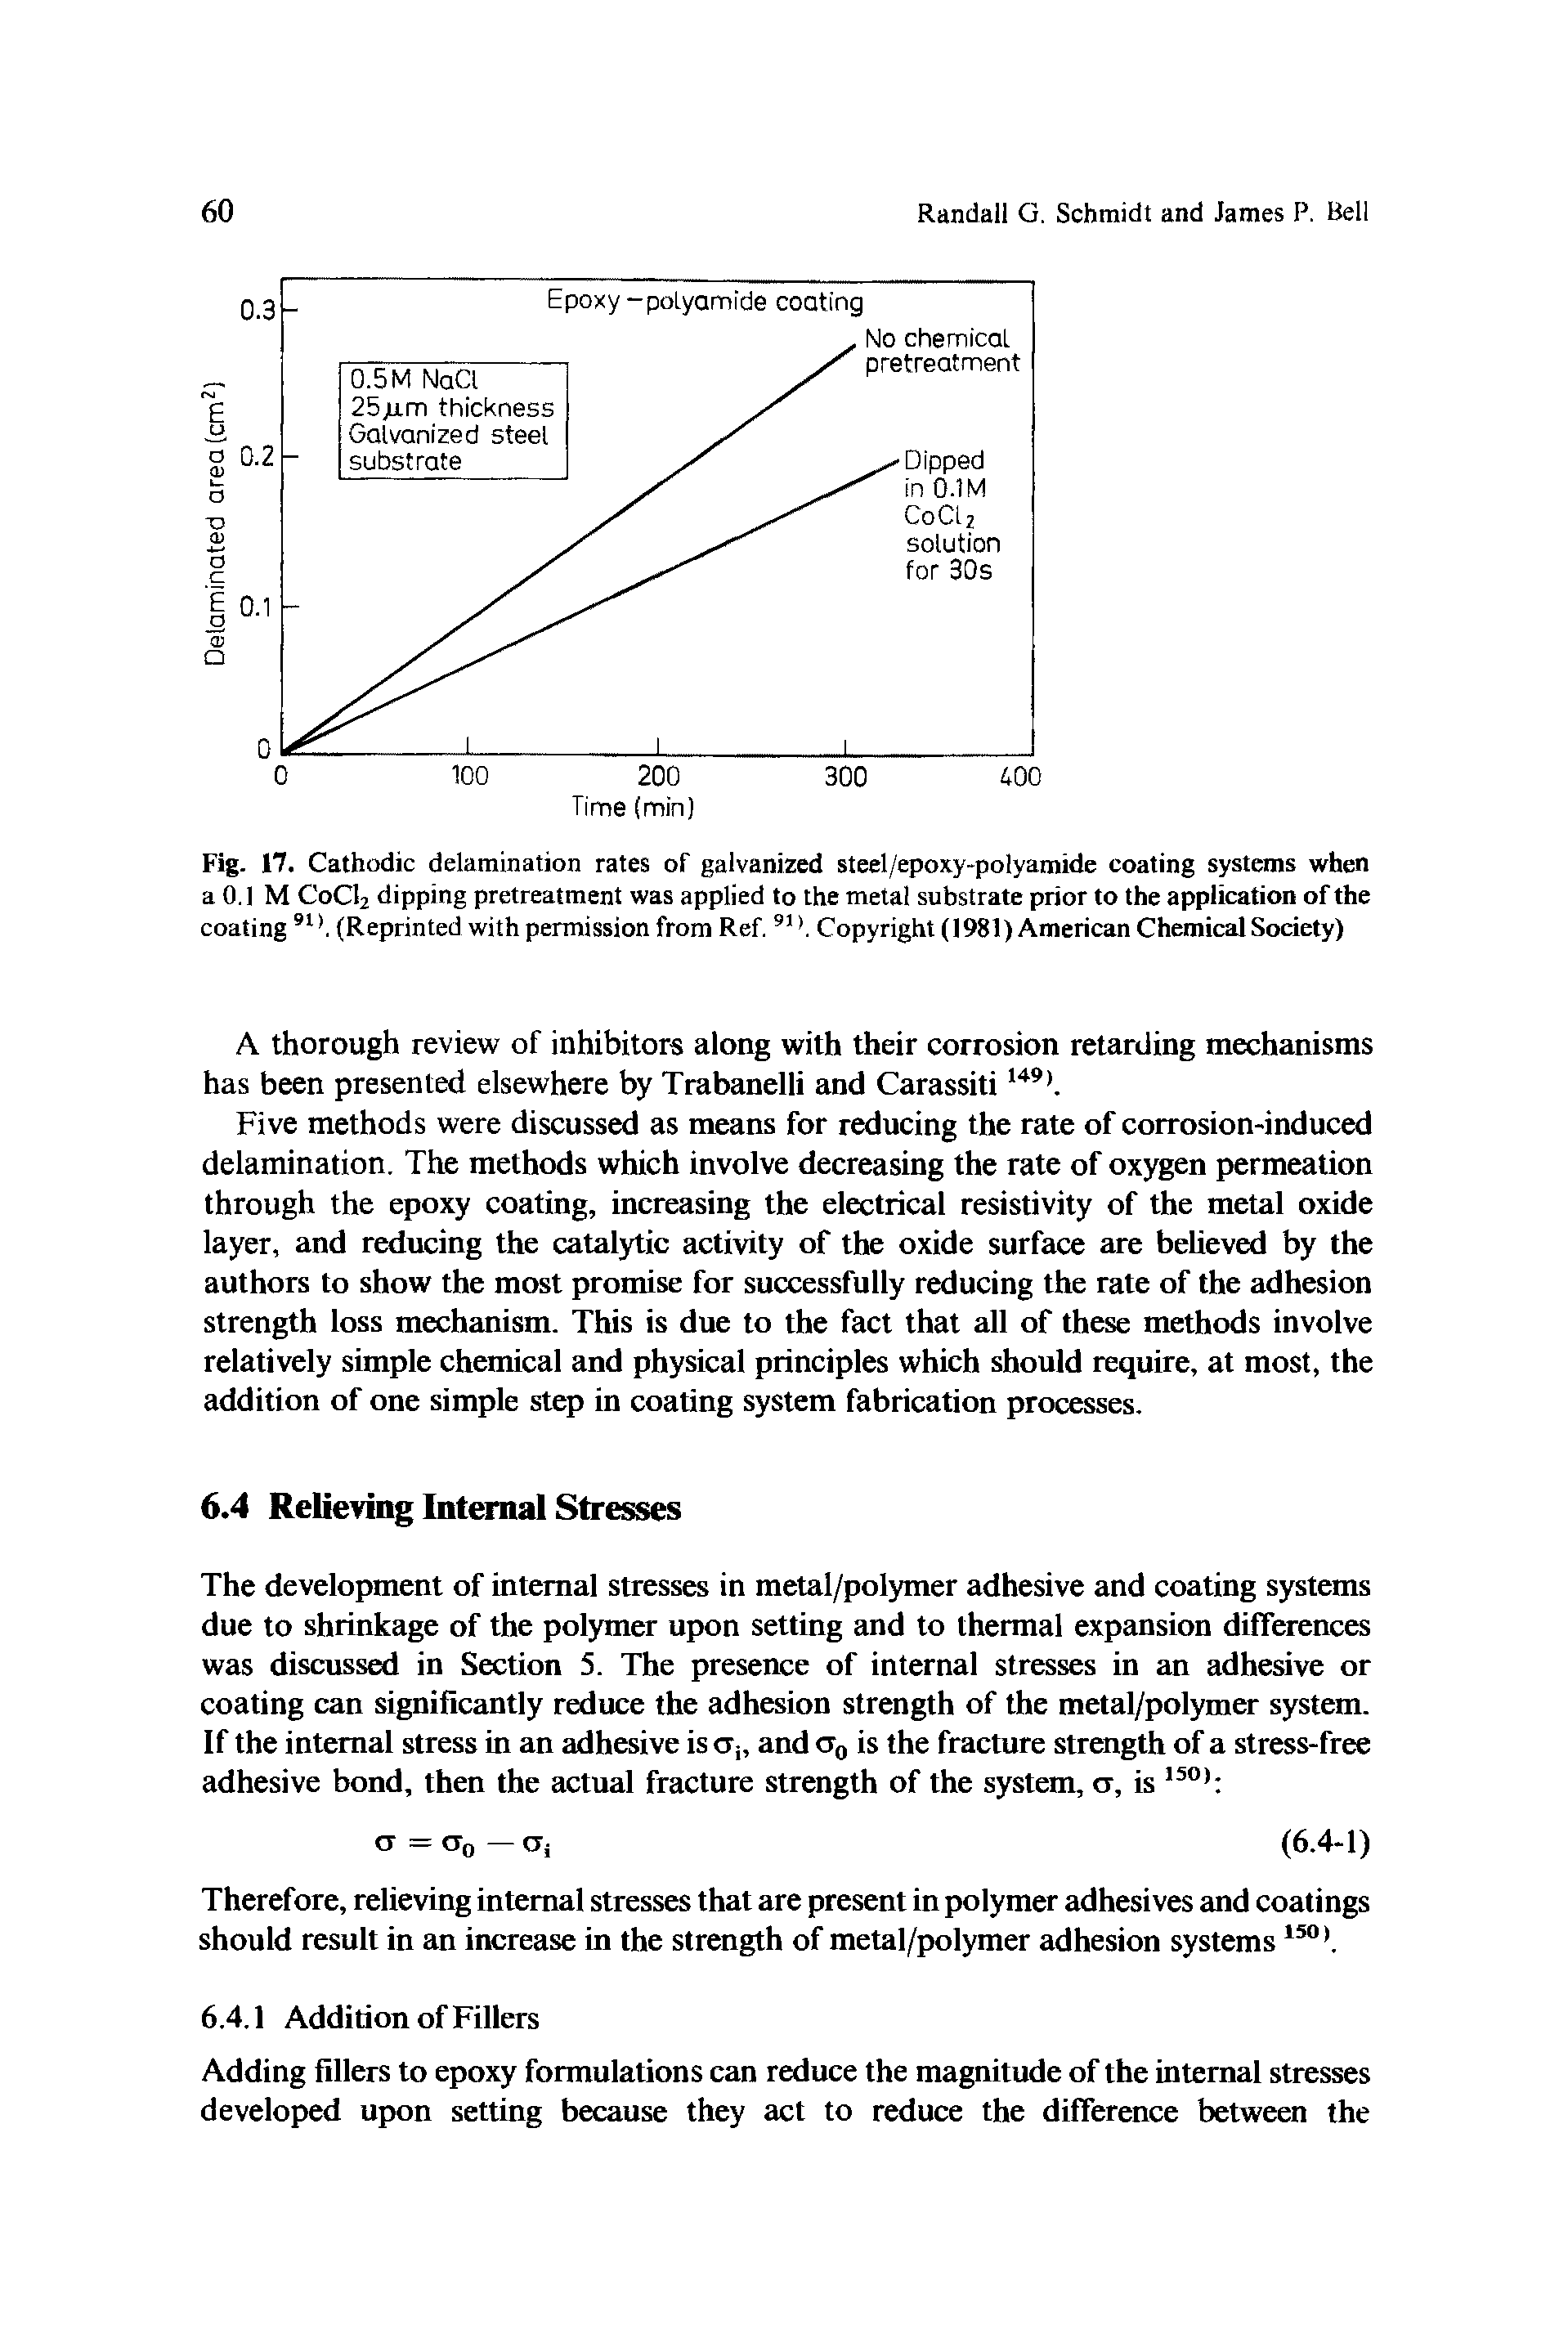 Fig. 17. Cathodic delamination rates of galvanized steel/epoxy-polyamide coating systems when a 0.1 M CoCl2 dipping pretreatment was applied to the metal substrate prior to the application of the coating 91K (Reprinted with permission from Ref. 91Copyright (1981) American Chemical Society)...